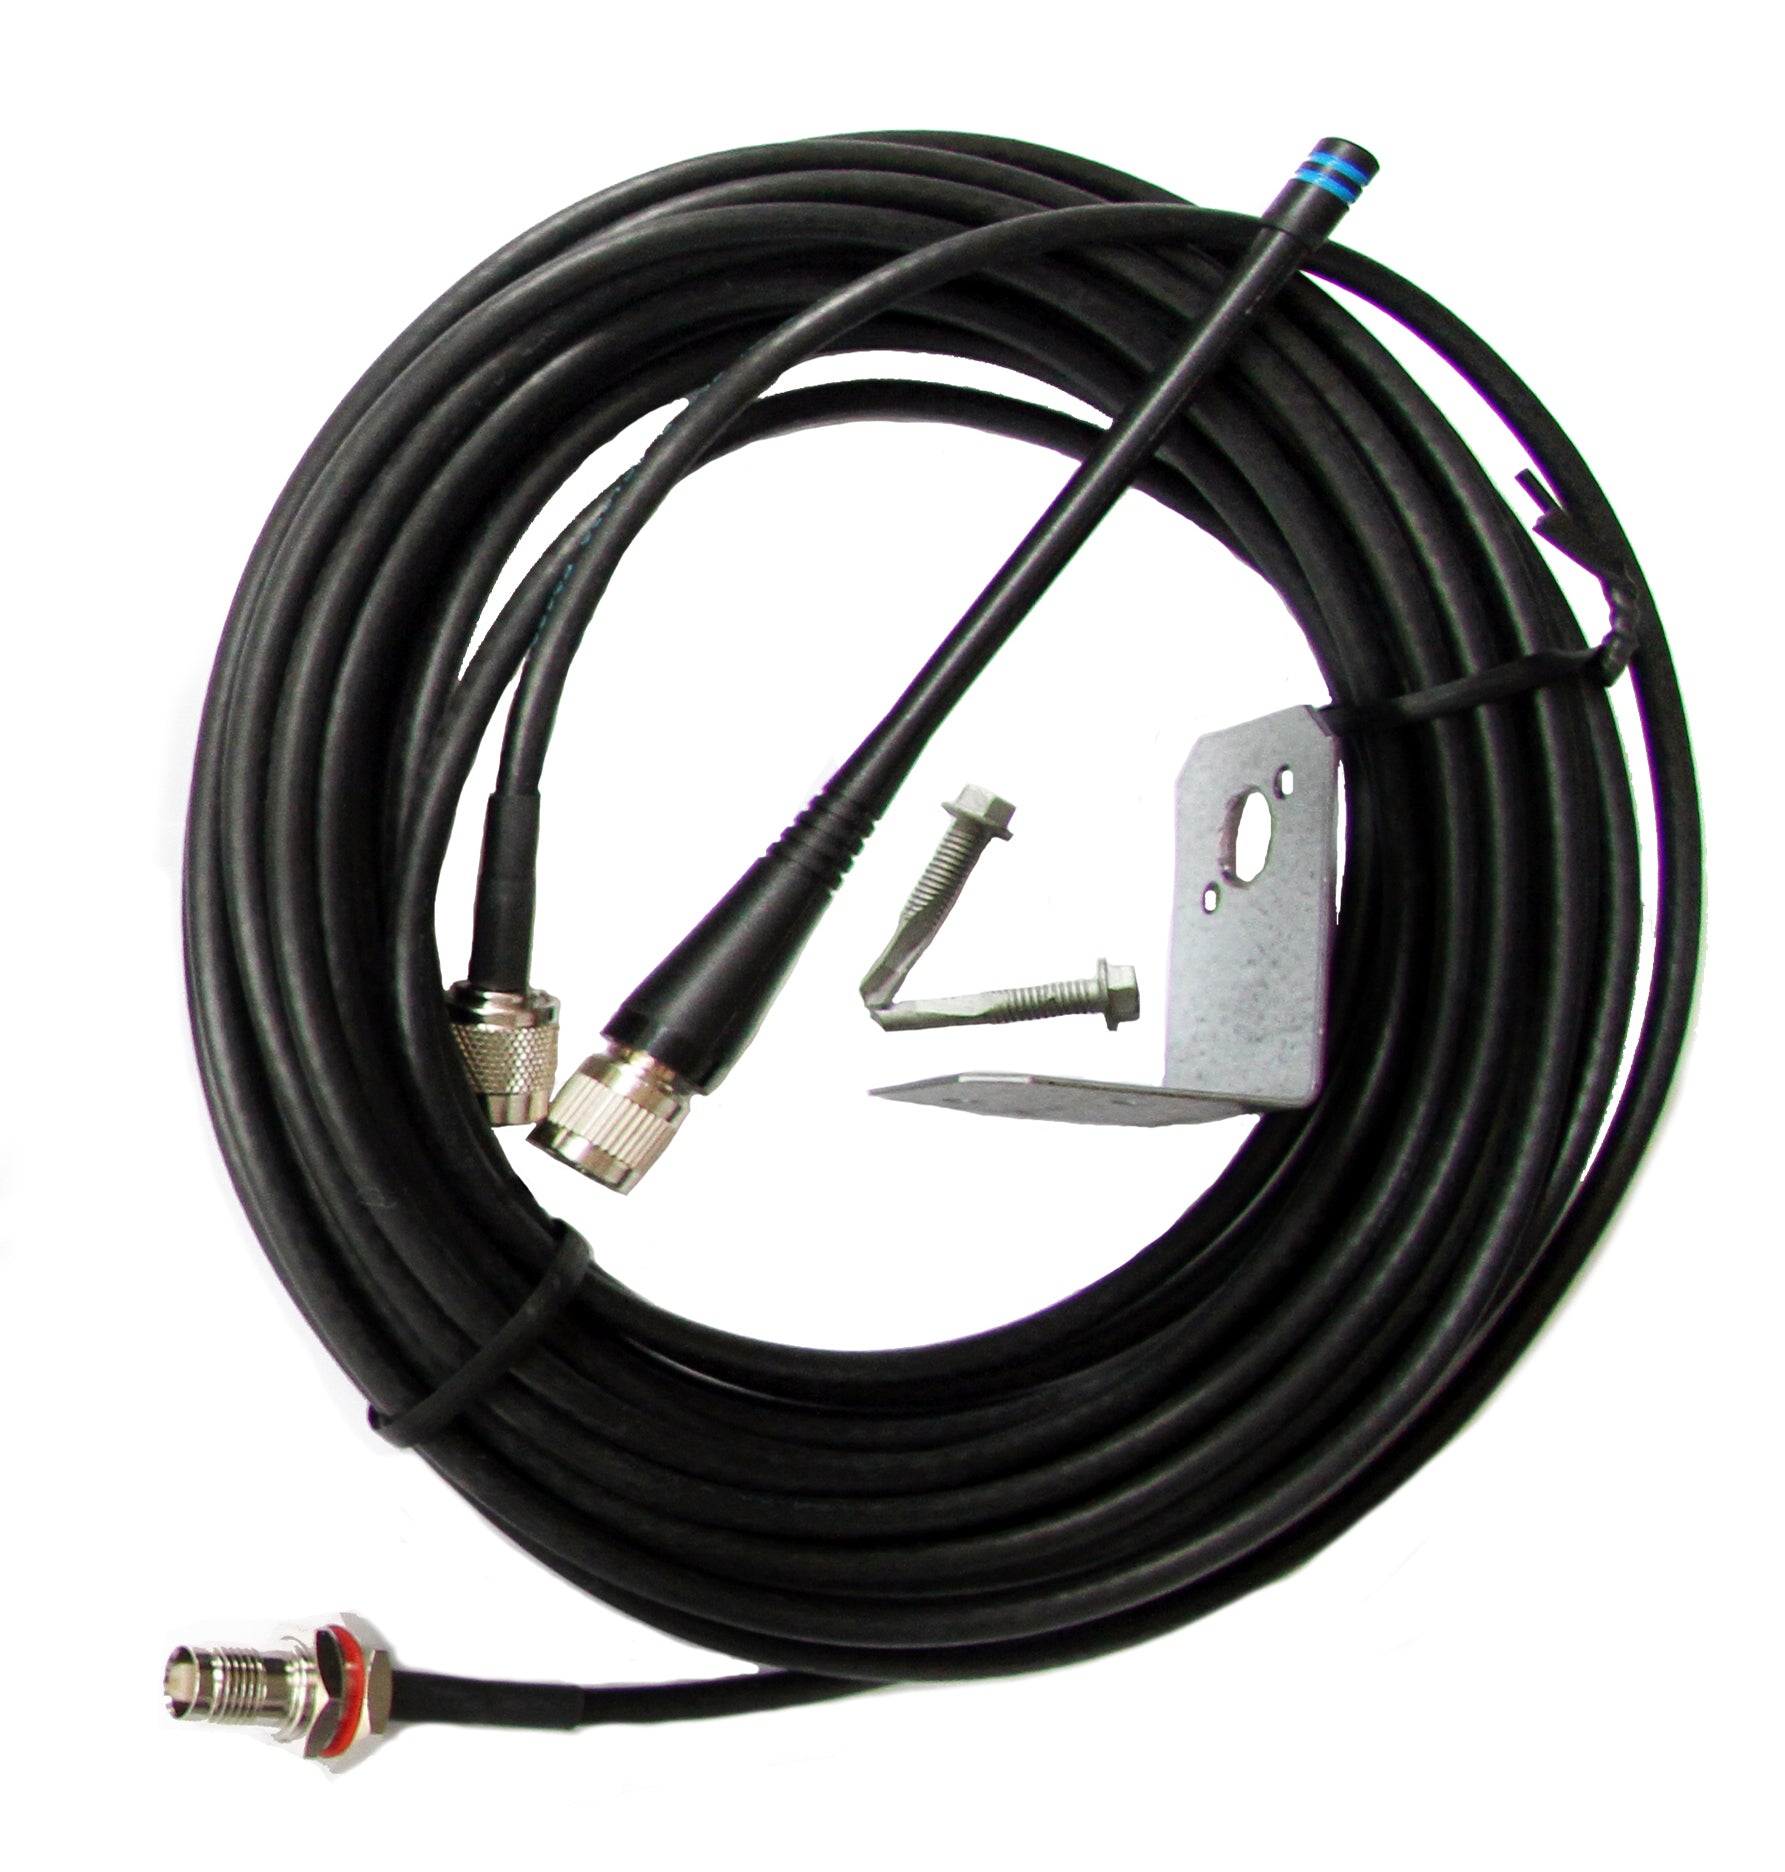 JR Products COAX Cable Antenna for 35 ft. Plus